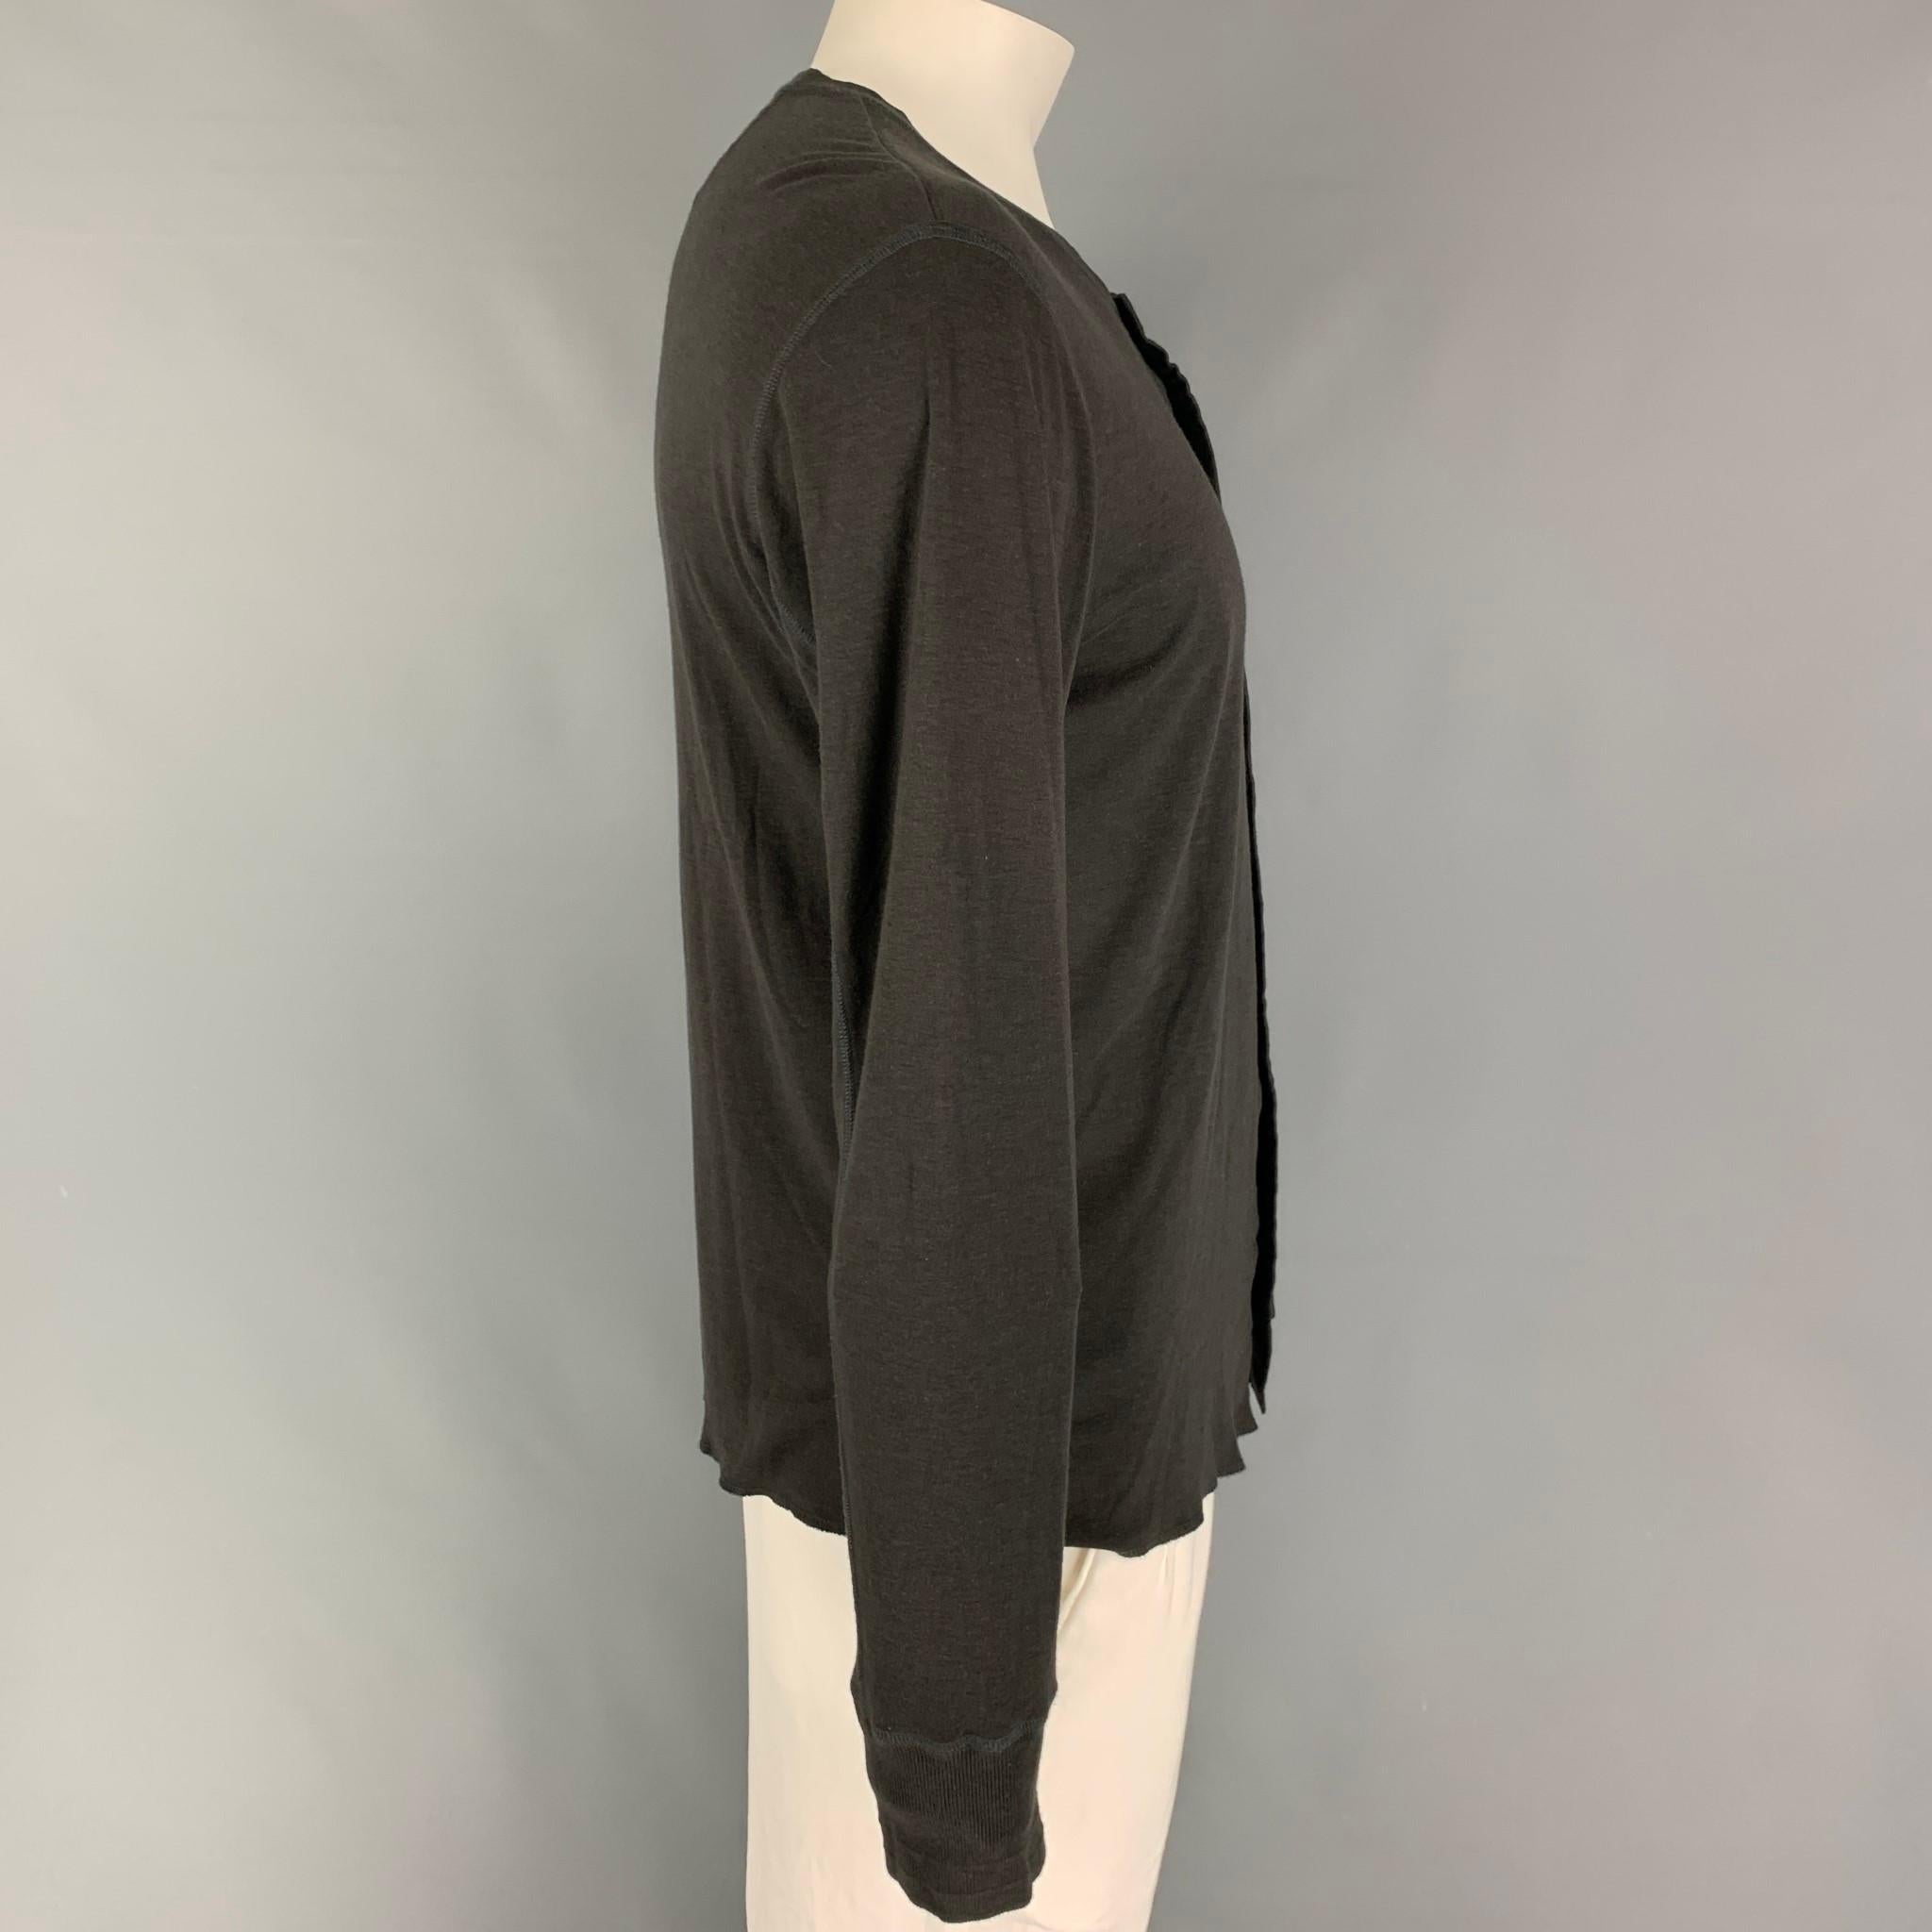 KIMINORI MORISHITA henley t-shirt comes in a charcoal cotton blend  featuring a buttoned closure. 

Very Good Pre-Owned Condition.
Marked: 6/50

Measurements:

Shoulder: 21 in.
Chest: 42 in.
Sleeve: 27 in.
Length: 25.5 in. 